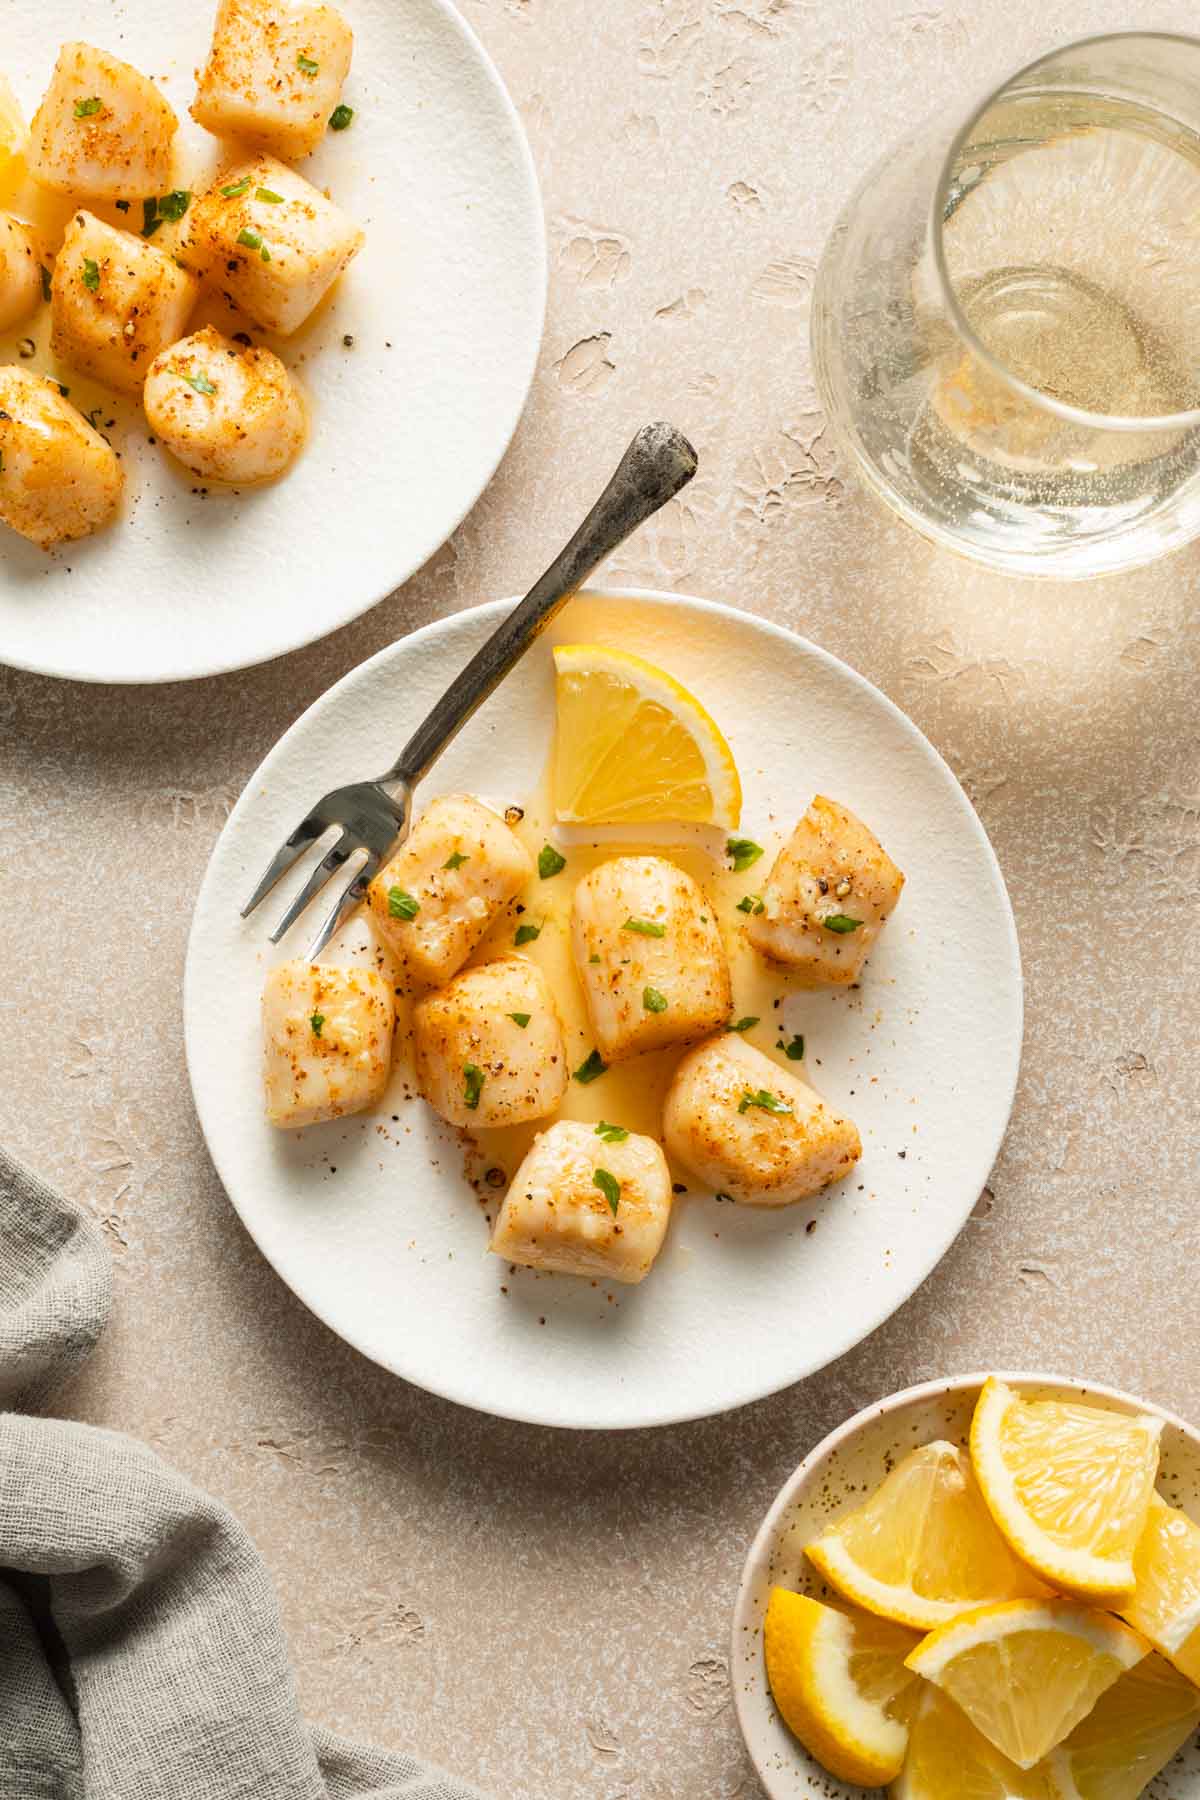 Air fried scallops arranged on two white plates next to lemon wedges and a glass of wine.